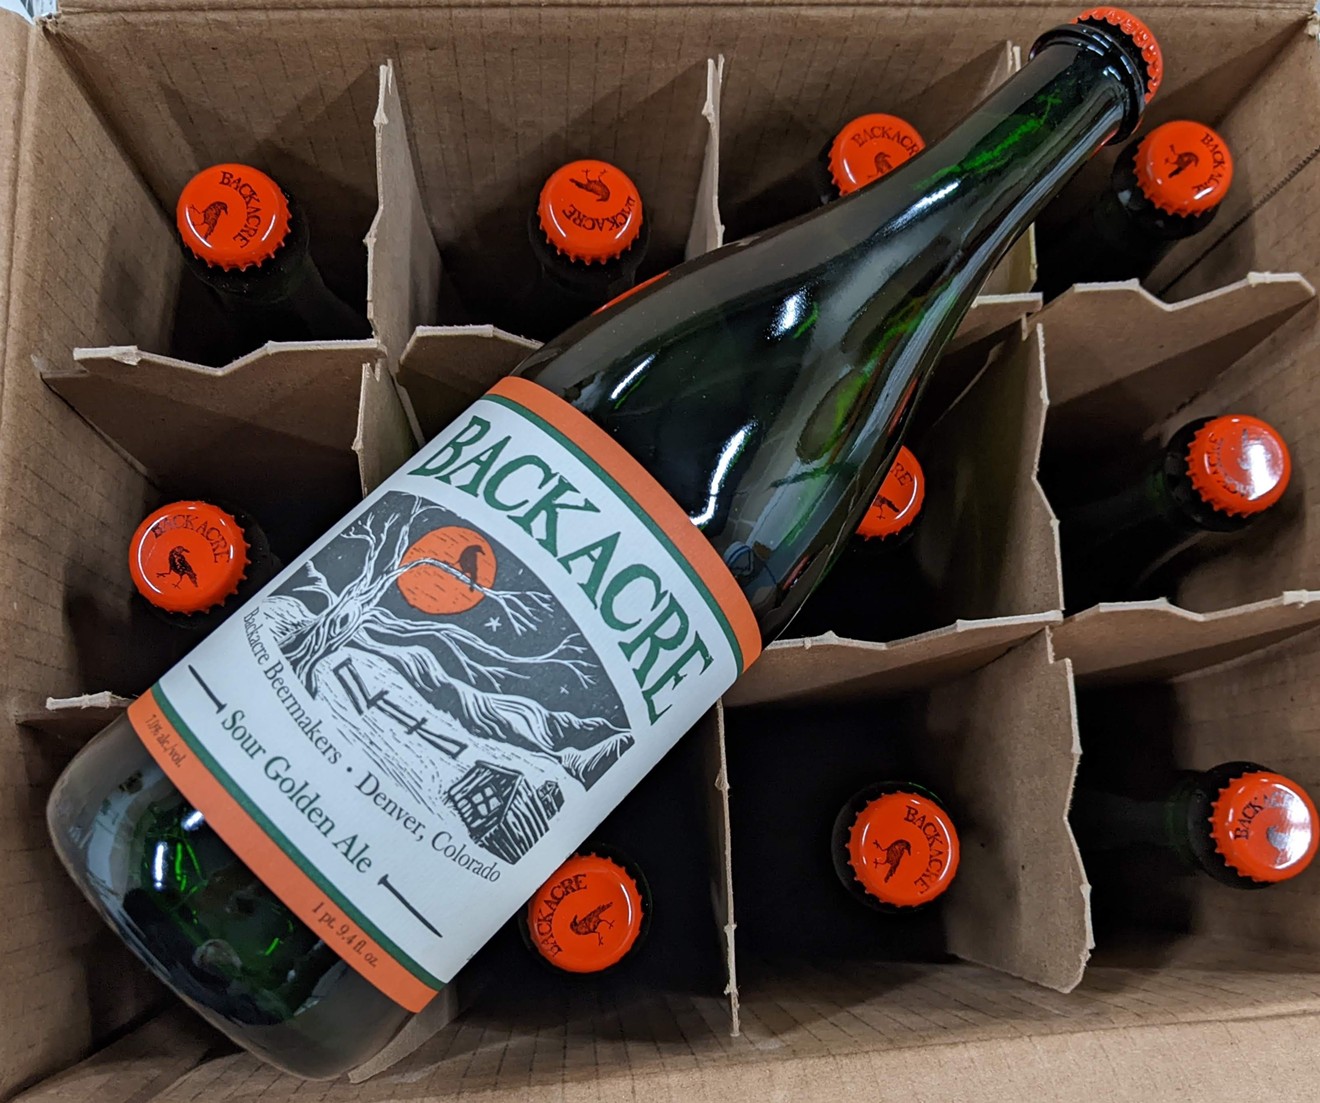 Batch 16 is being released this season in limited quantities, primarily in the Denver area.